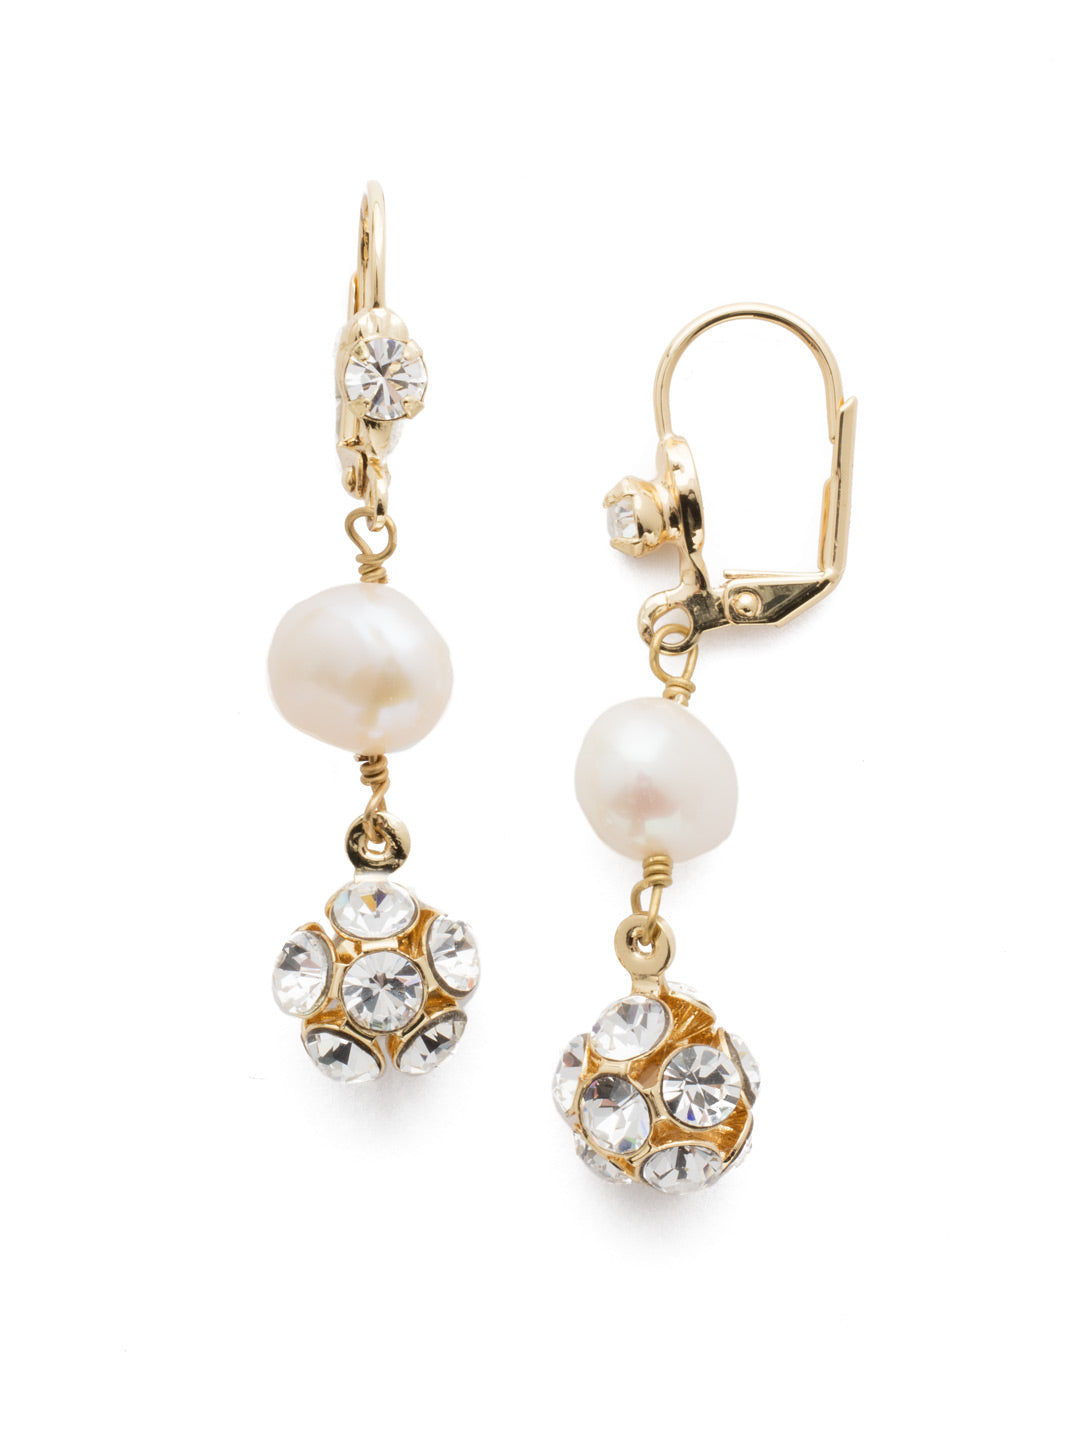 Isla Dangle Earring - 4EEF16MXMDP - <p>Understated and delicate, the touch of sparkle and pair of pearls in this pair are all you need to radiate beauty. From Sorrelli's Modern Pearl collection in our Mixed Metal finish.</p>